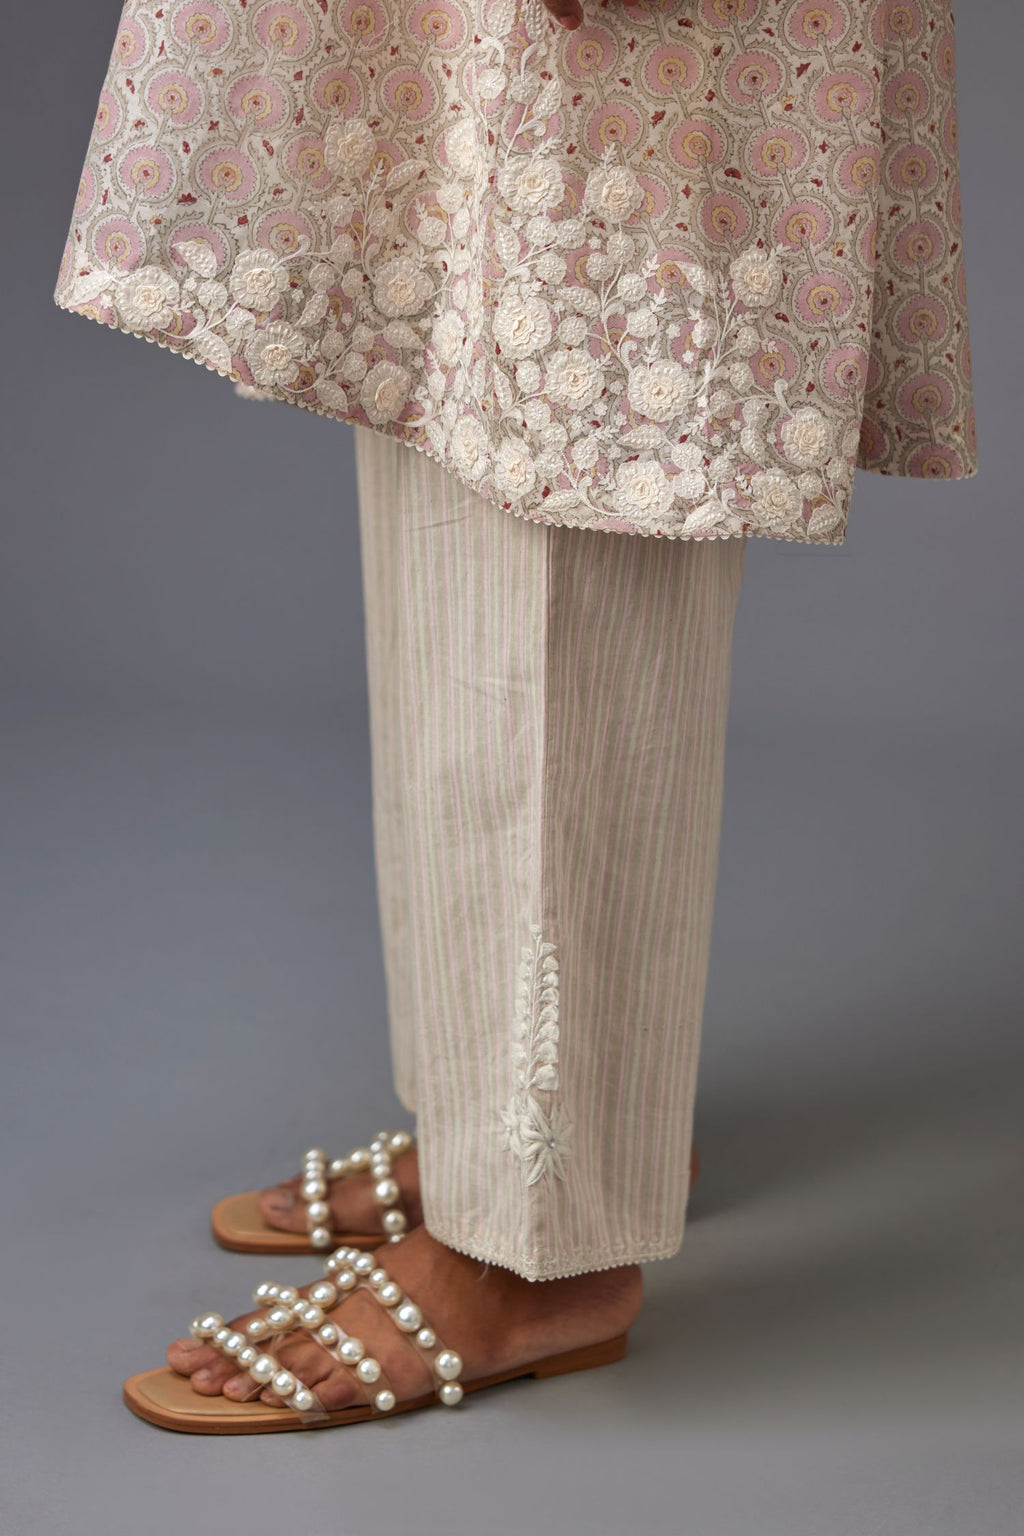 Pink & grey hand block printed short A-line kurta set with appliqué embroidery, highlighted with ric rac lace and sequins.